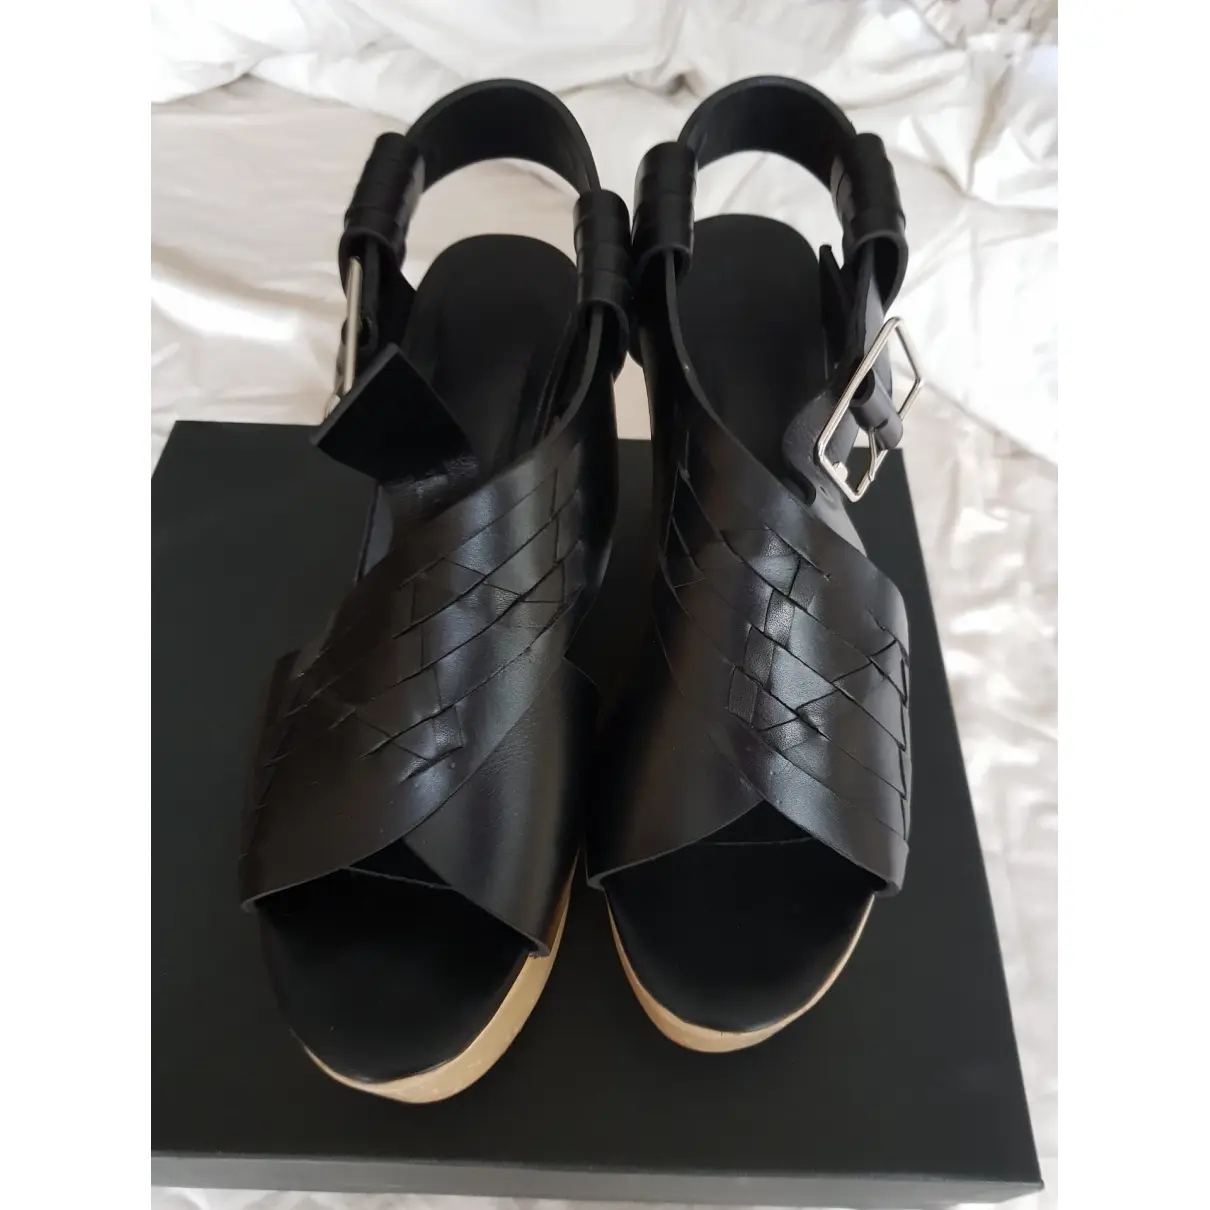 Thakoon Addition Leather sandals for sale